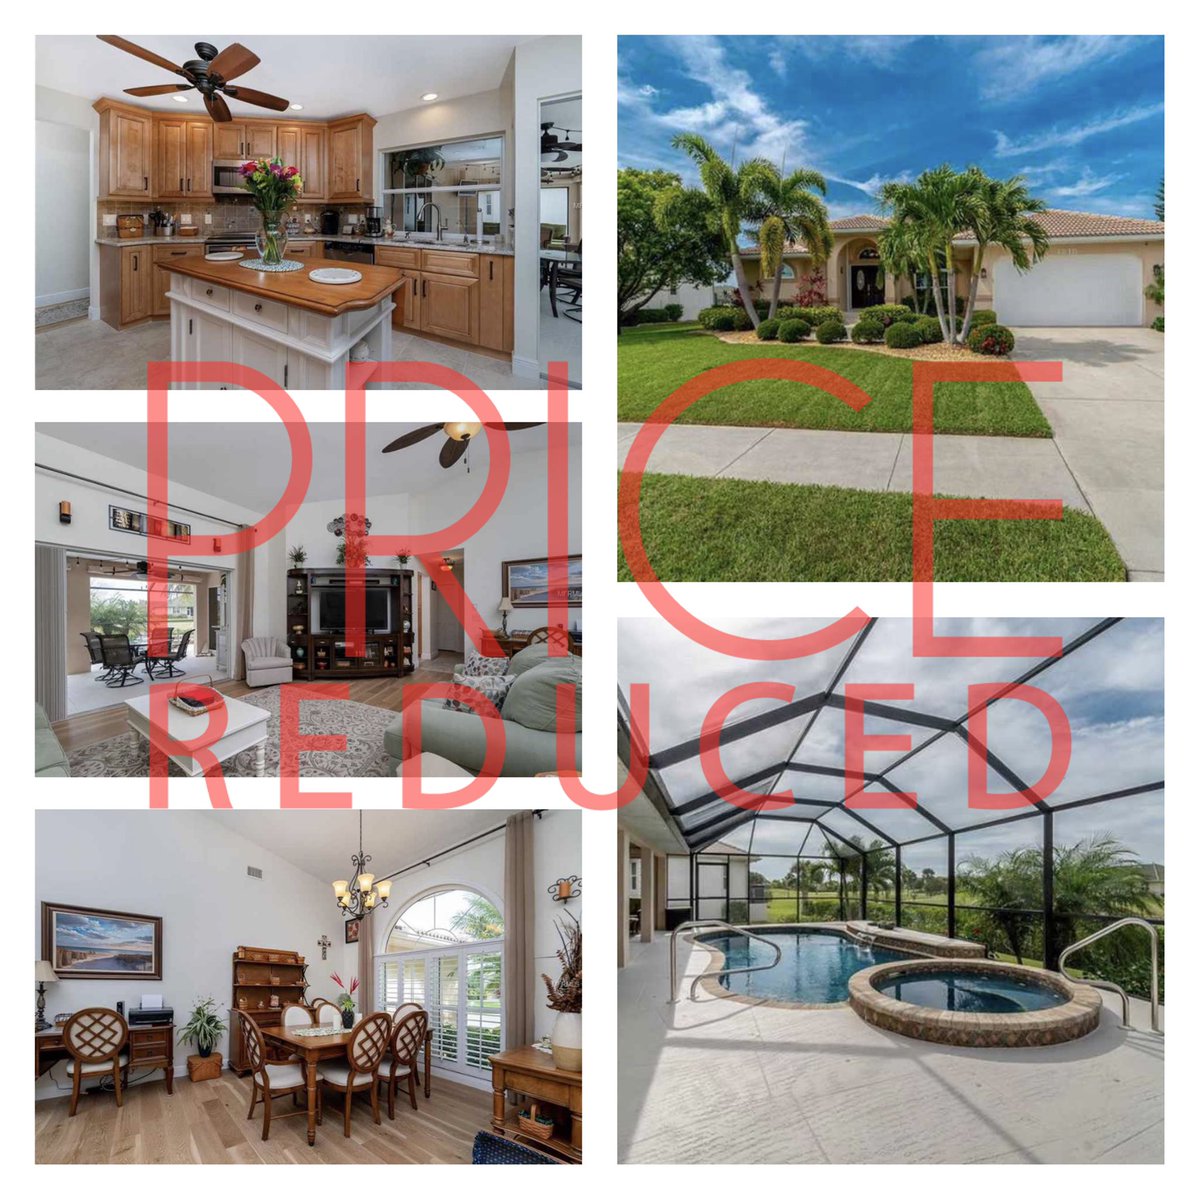 ❗️❗️PRICE REDUCED❗️❗️▶️$459,000◀️
📍1518 Suzi St. Punta Gorda, FL 33950 3 bed 2 bath▪️Split floor plan▪️Updates galore▪️pool/spa with oversized deck 📲Contact me today for more details!
#BrendaSellsPuntaGorda
#Puntagorgeous
#puntagordafl
#puntagordarealestate
#puntagordahomes